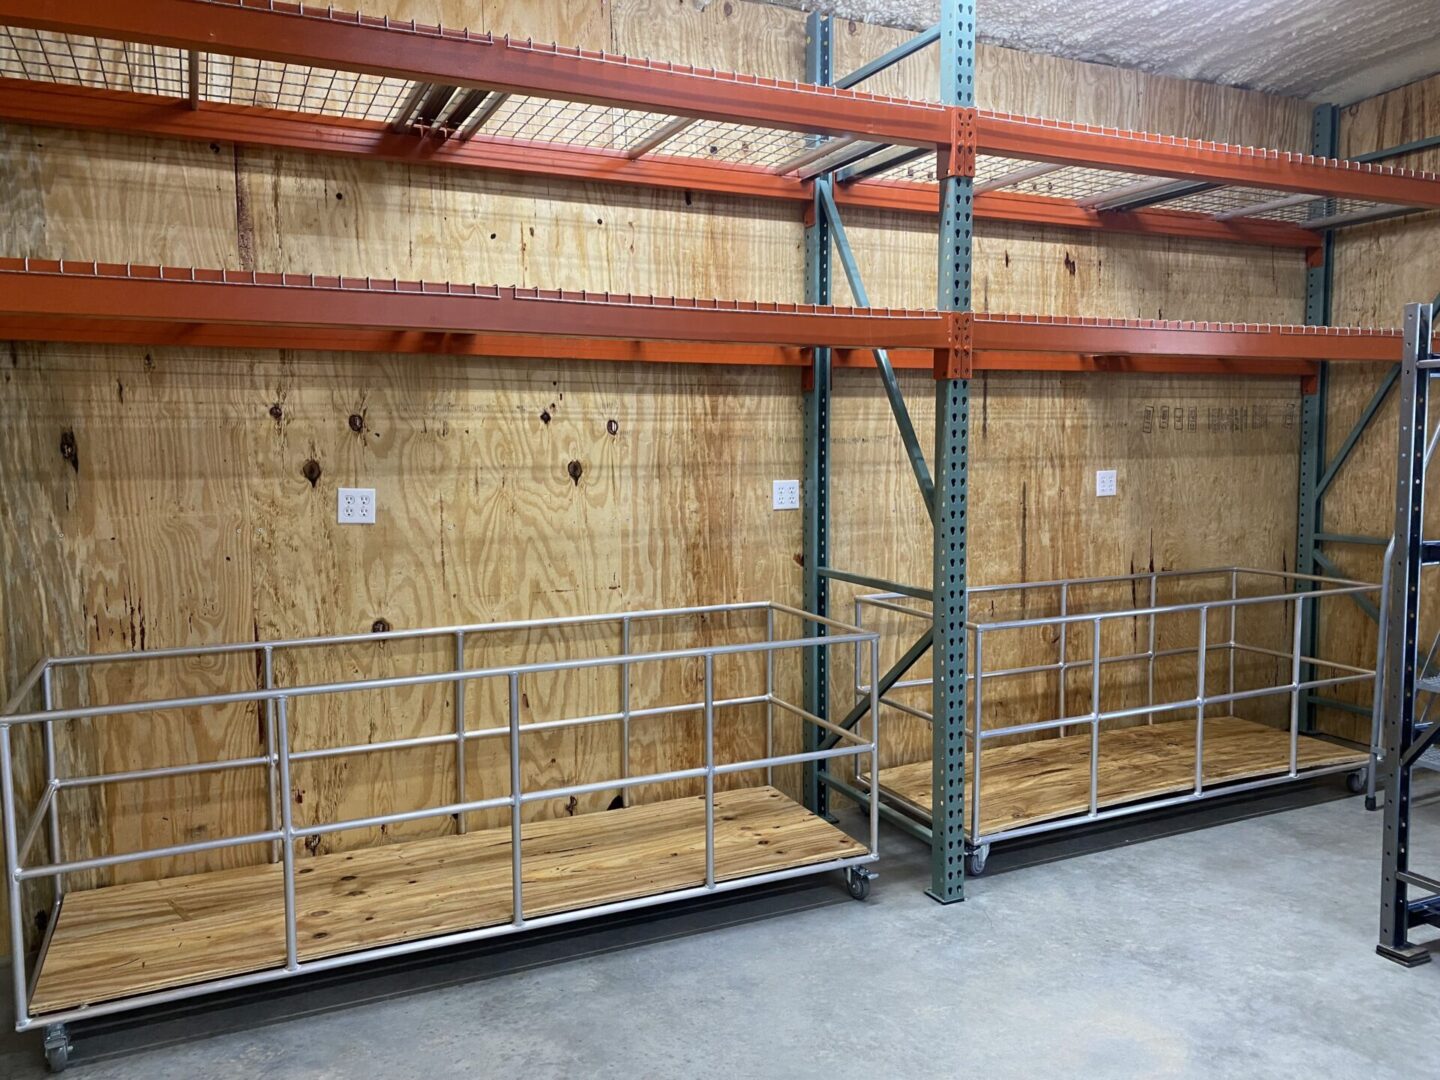 An empty storage facility with shelves